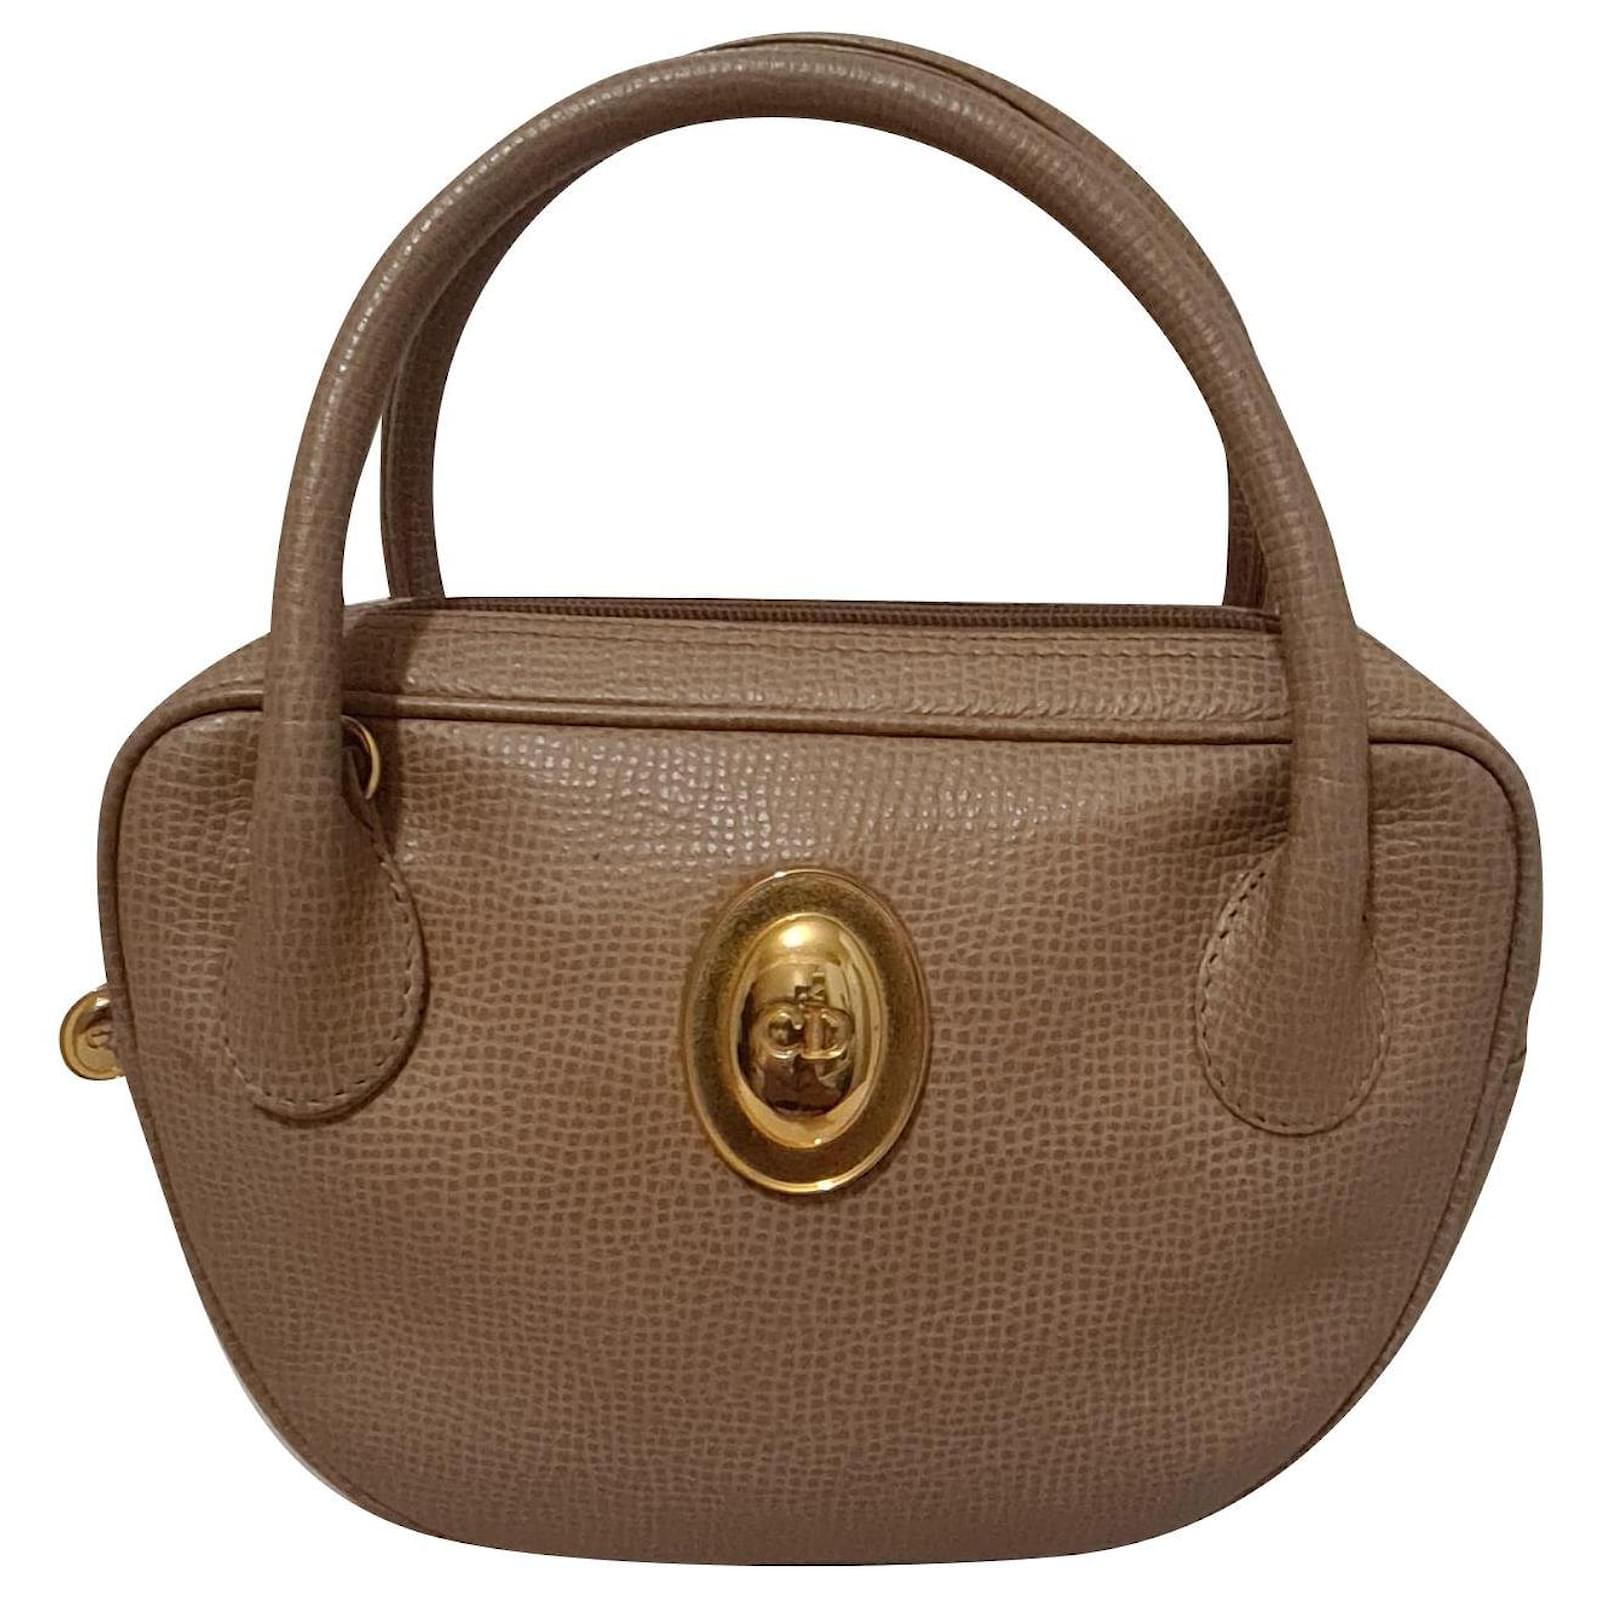 Dior Saddle bag in brown and beige suede and sheepskin Leather